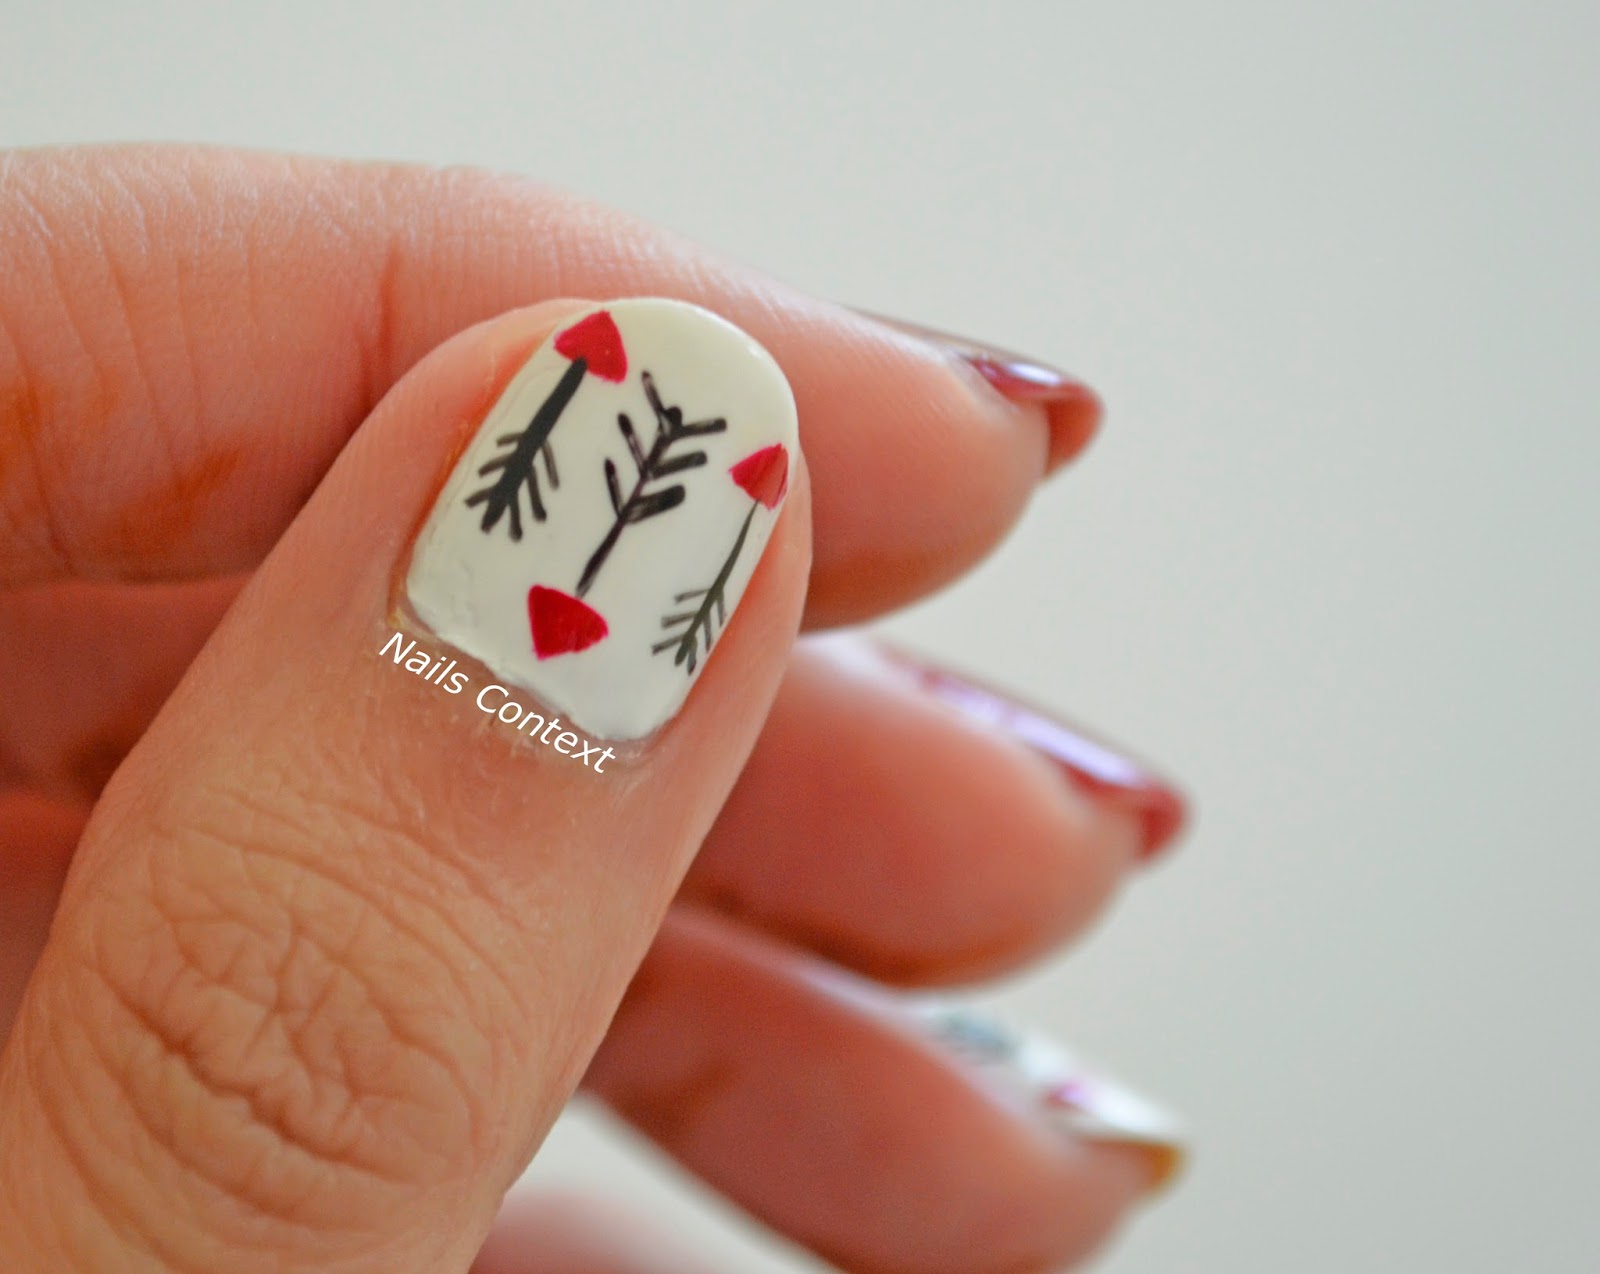 2. Bow and Arrow Nail Designs - wide 7